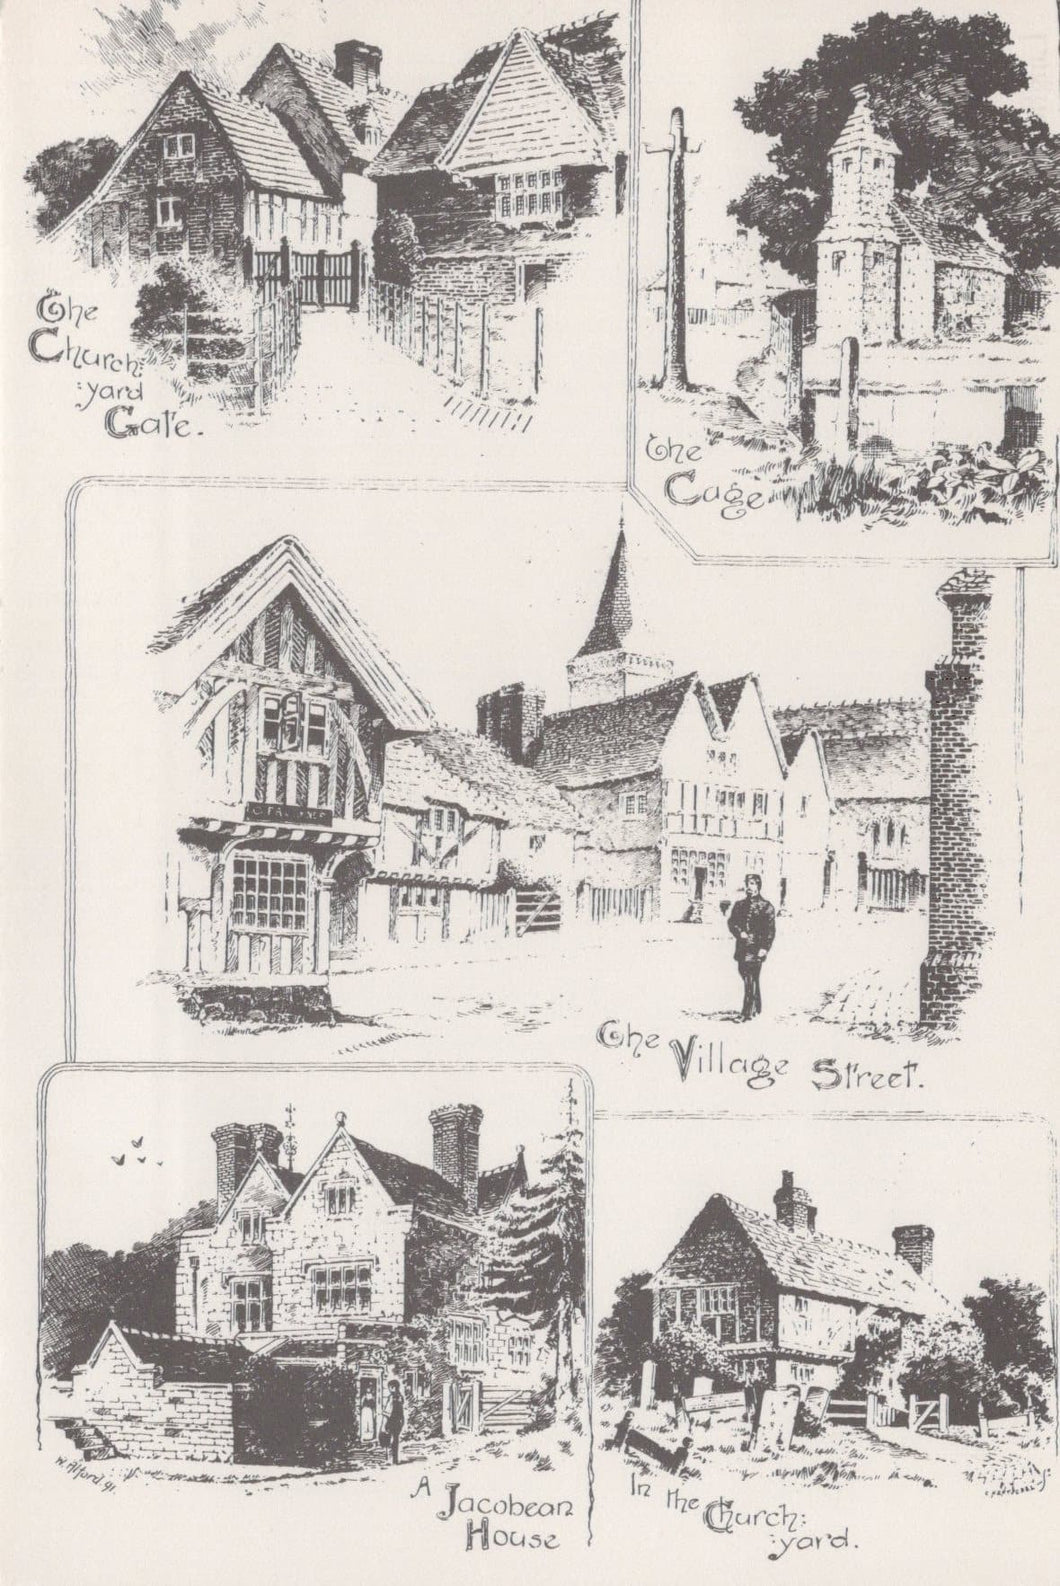 Surrey Postcard - Pencil Sketch Showing Views of Lingfield in The 1890's - Mo’s Postcards 